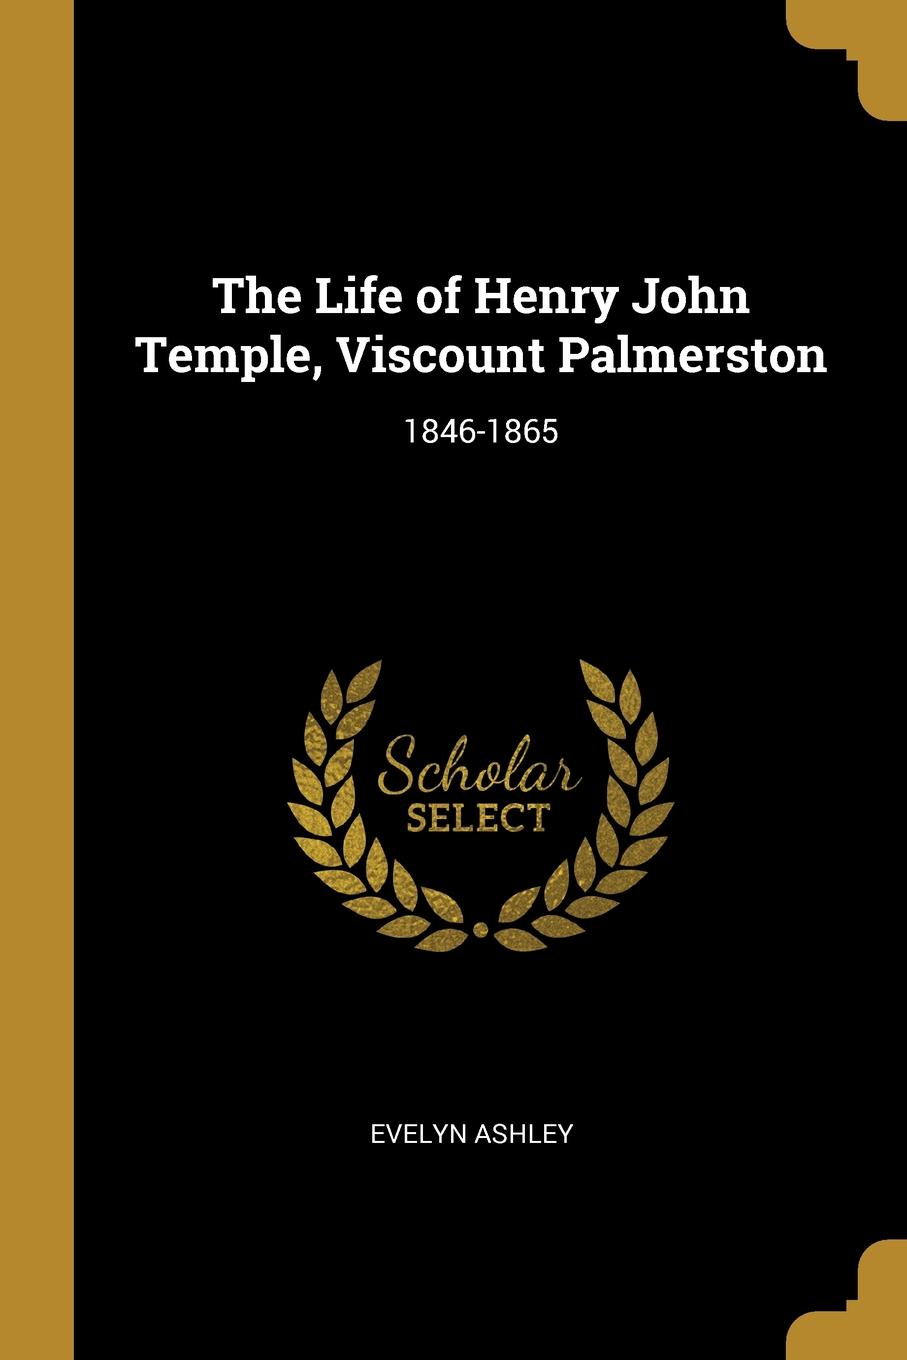 The Life of Henry John Temple, Viscount Palmerston. 1846-1865